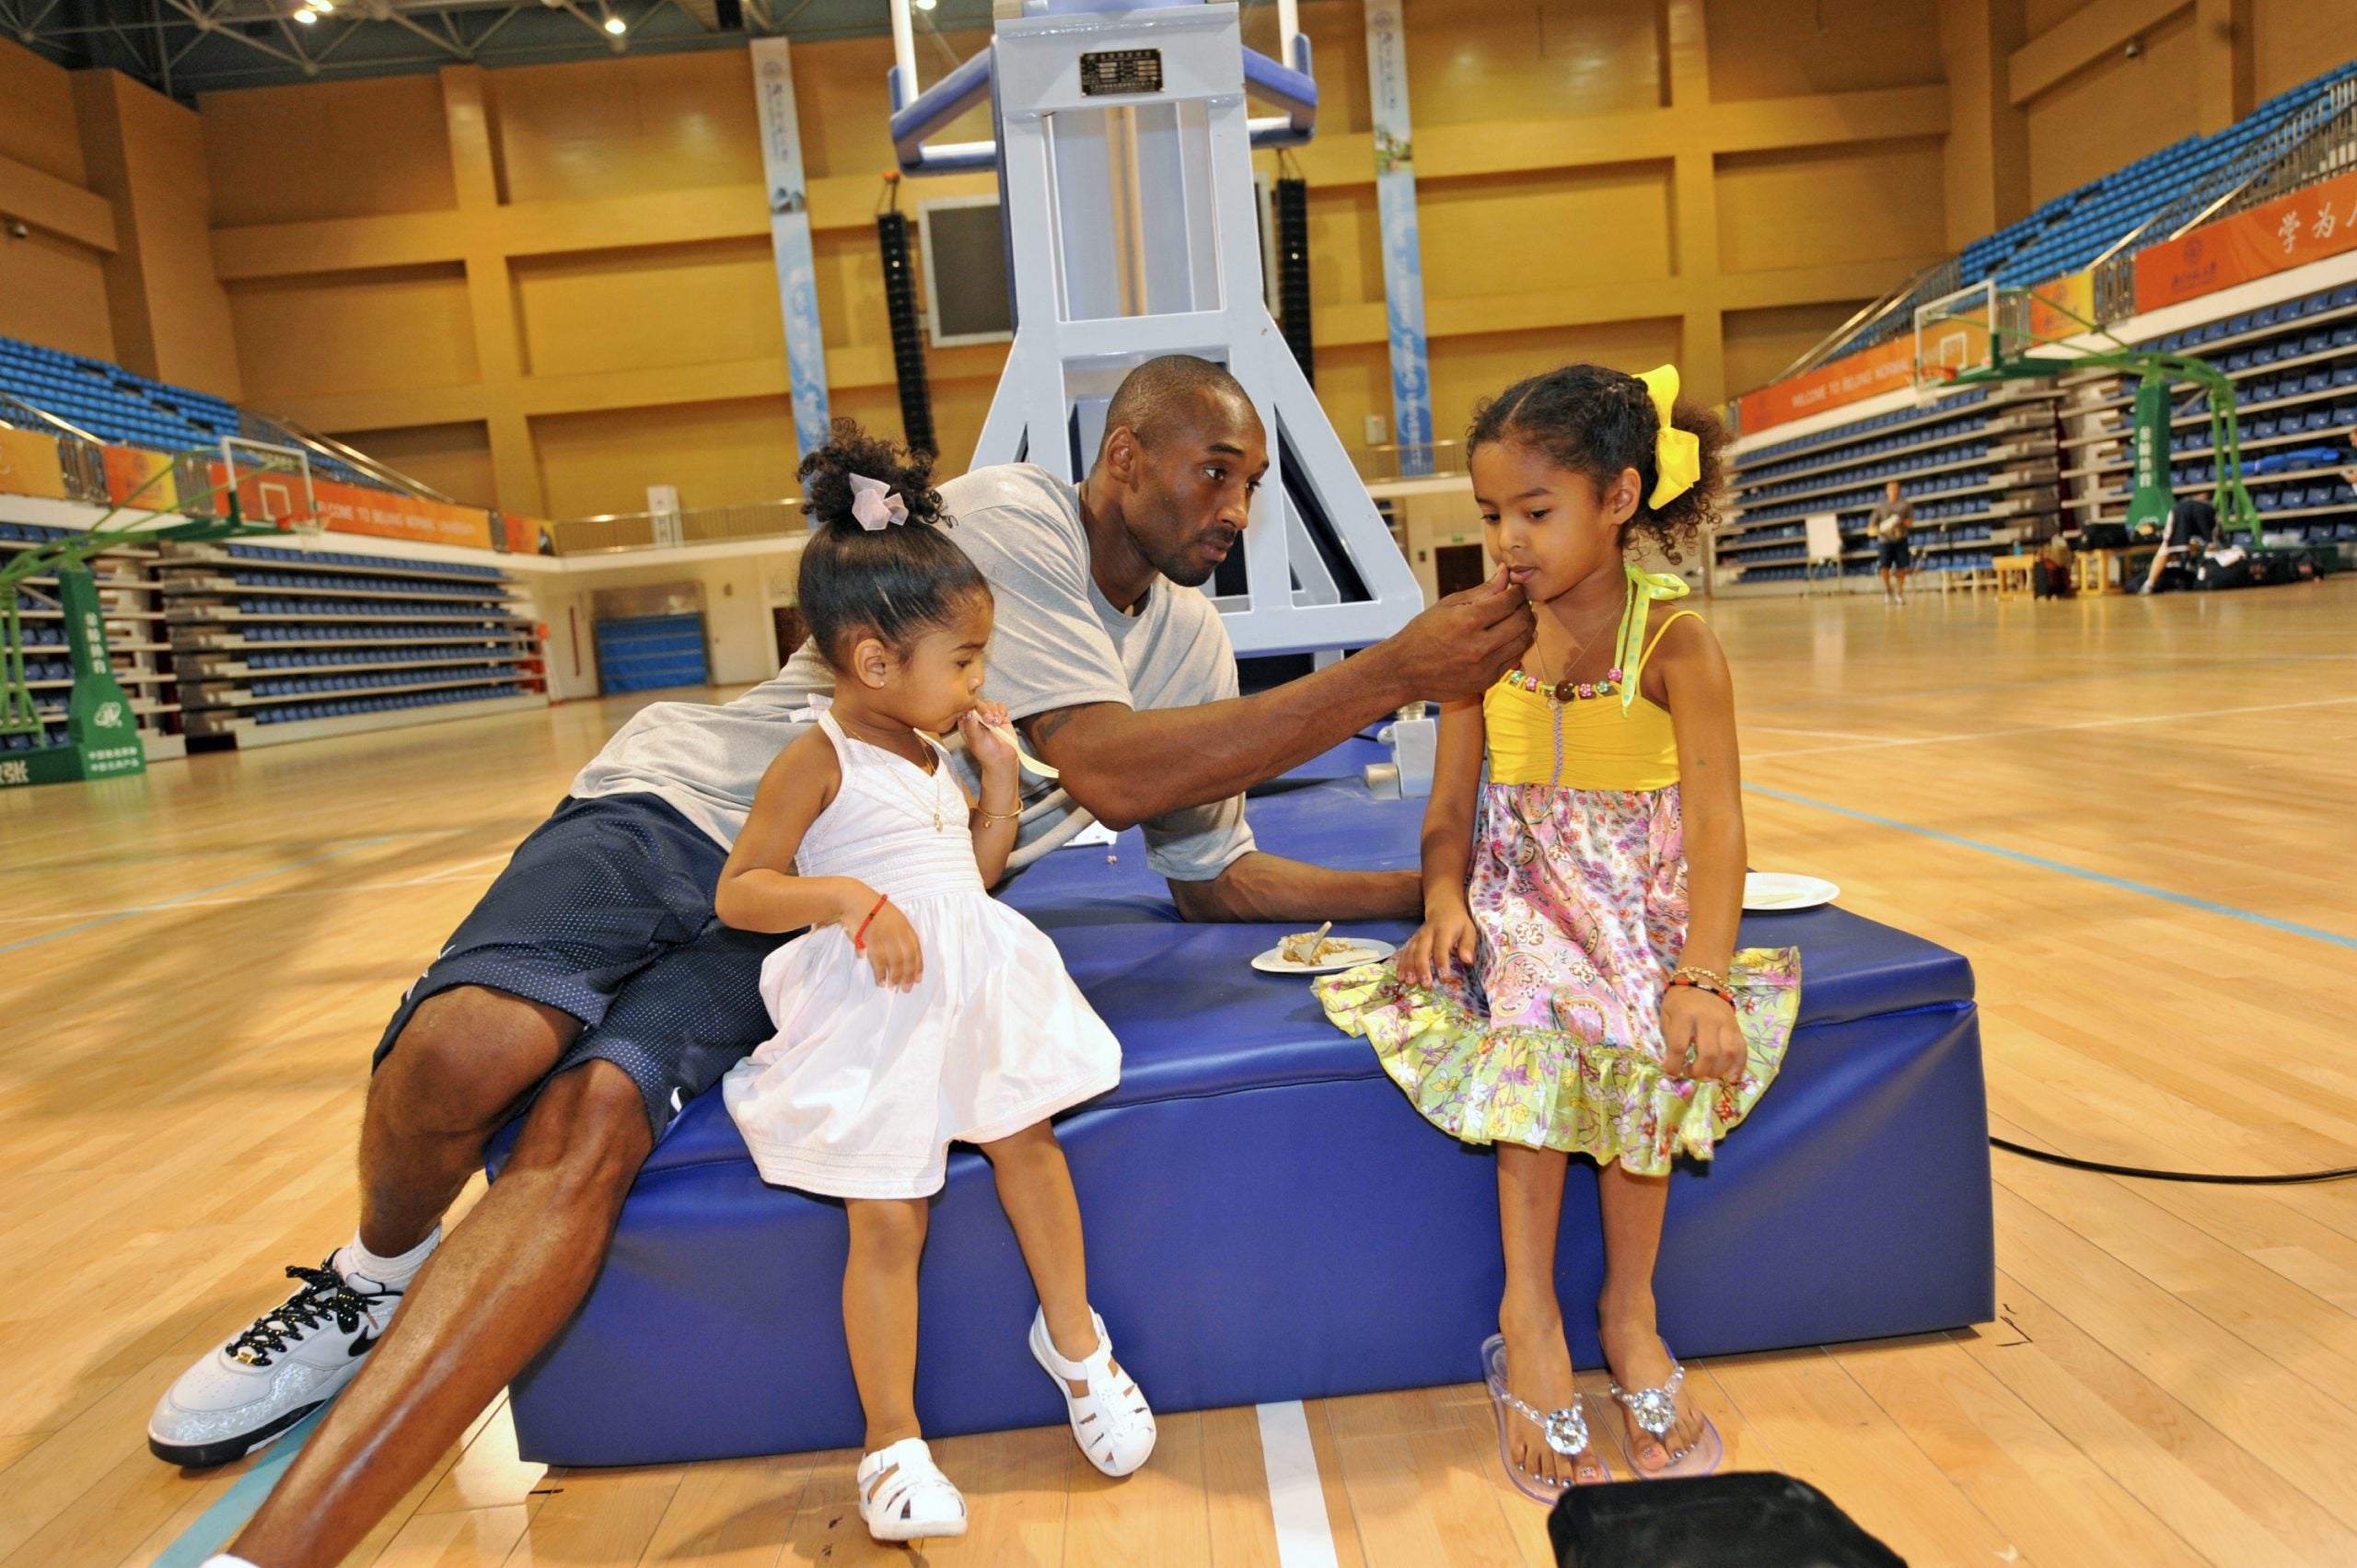 24 Photos Of Kobe Bryant, The Father And Family Man